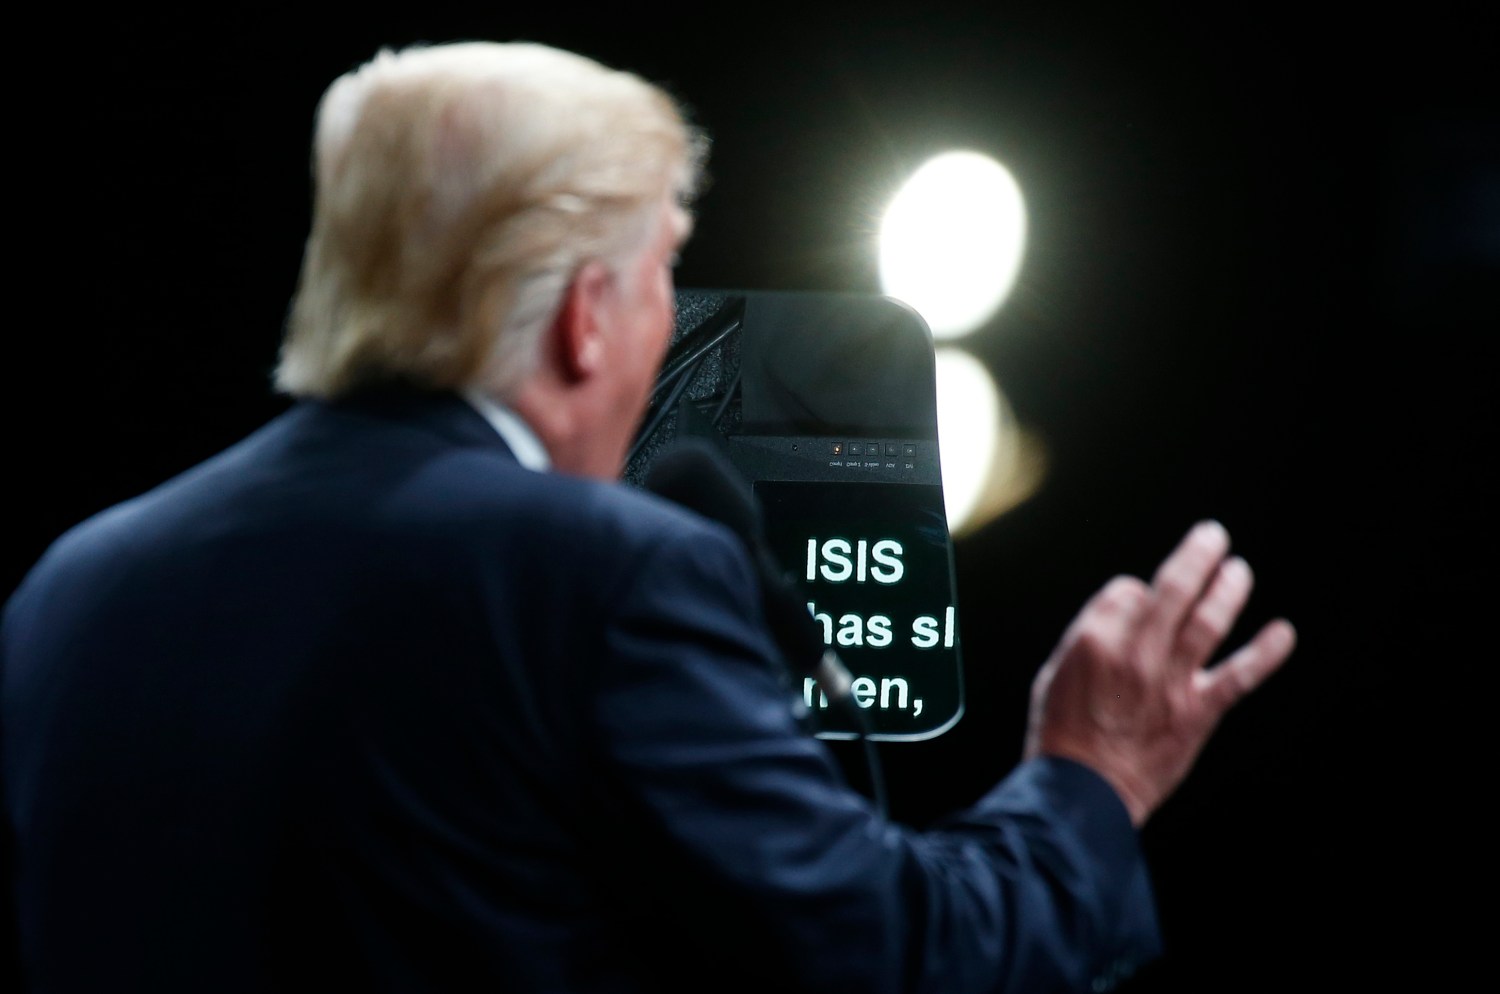 The word Isis is pictured on a teleprompter as Republican presidential nominee Donald Trump speaks at a campaign event in Selma, North Carolina, U.S. November 3, 2016. REUTERS/Carlo Allegri - RTX2RTWS